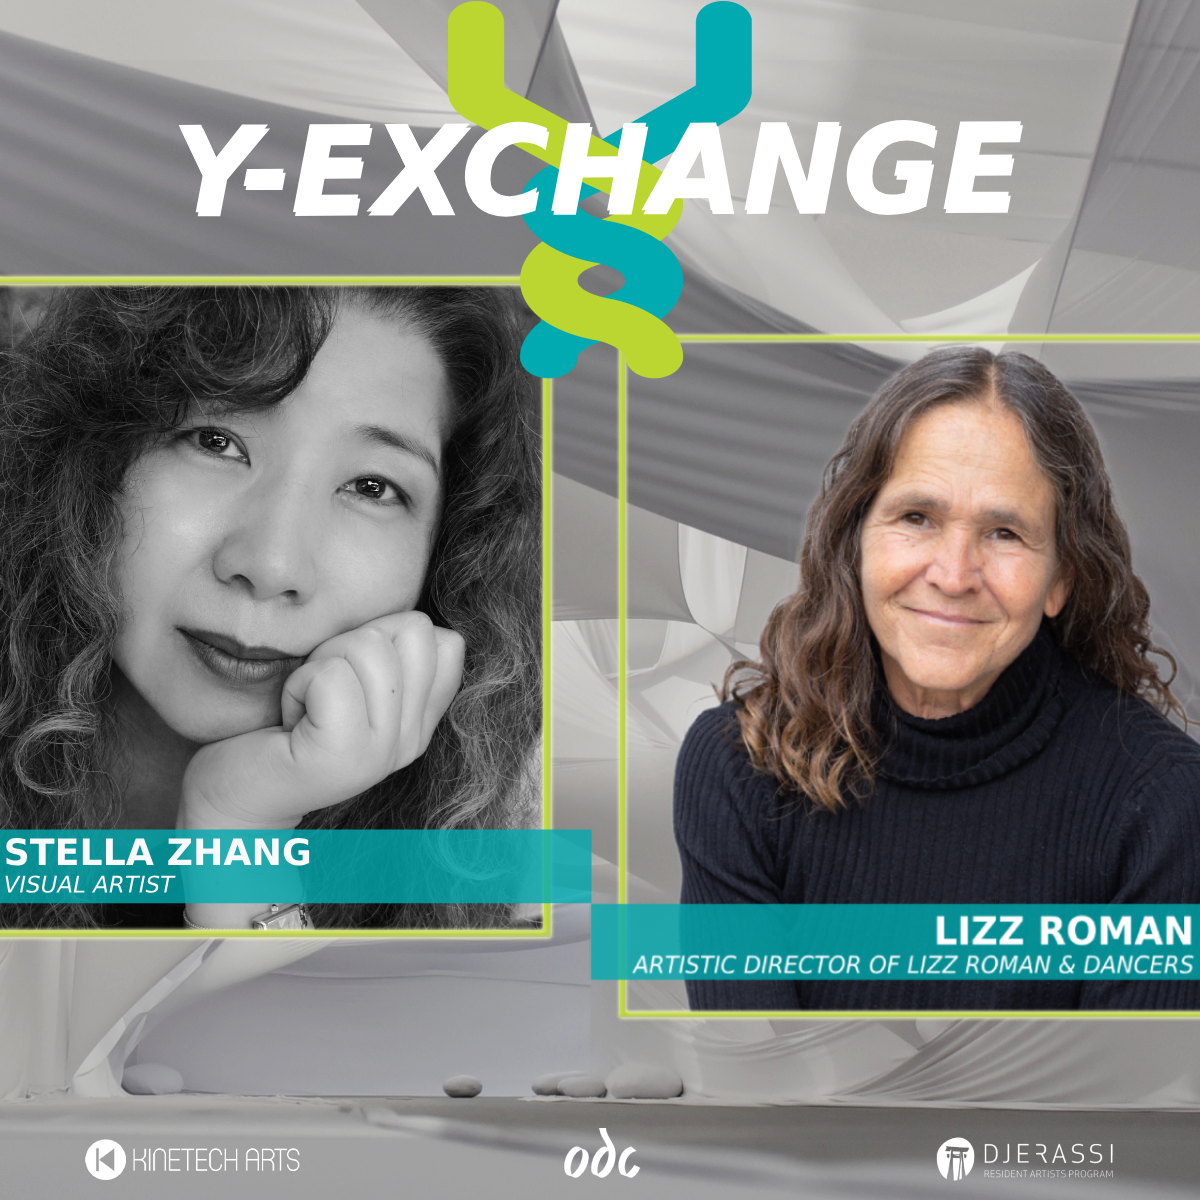 This graphic features portraits of visual artist Stella Zhang and artistic director Lizz Roman. Stella's installation work entitled Pliability is used as a background for the image and represents white fabric stretched across a spacious room.